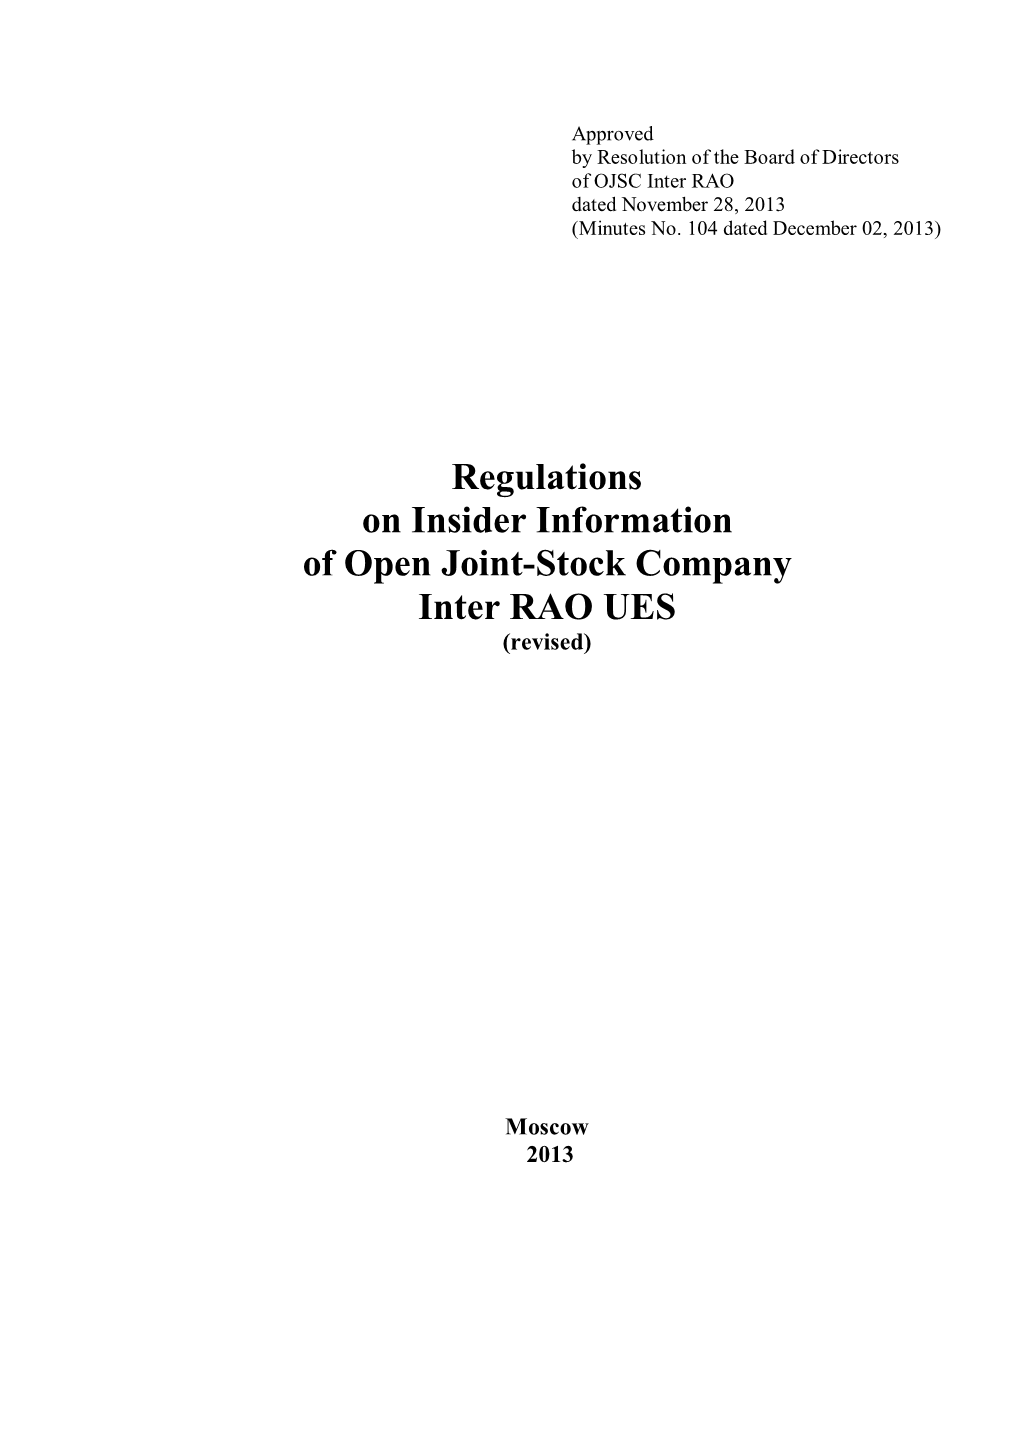 Regulations on Insider Information of Open Joint-Stock Company Inter RAO UES (Revised)